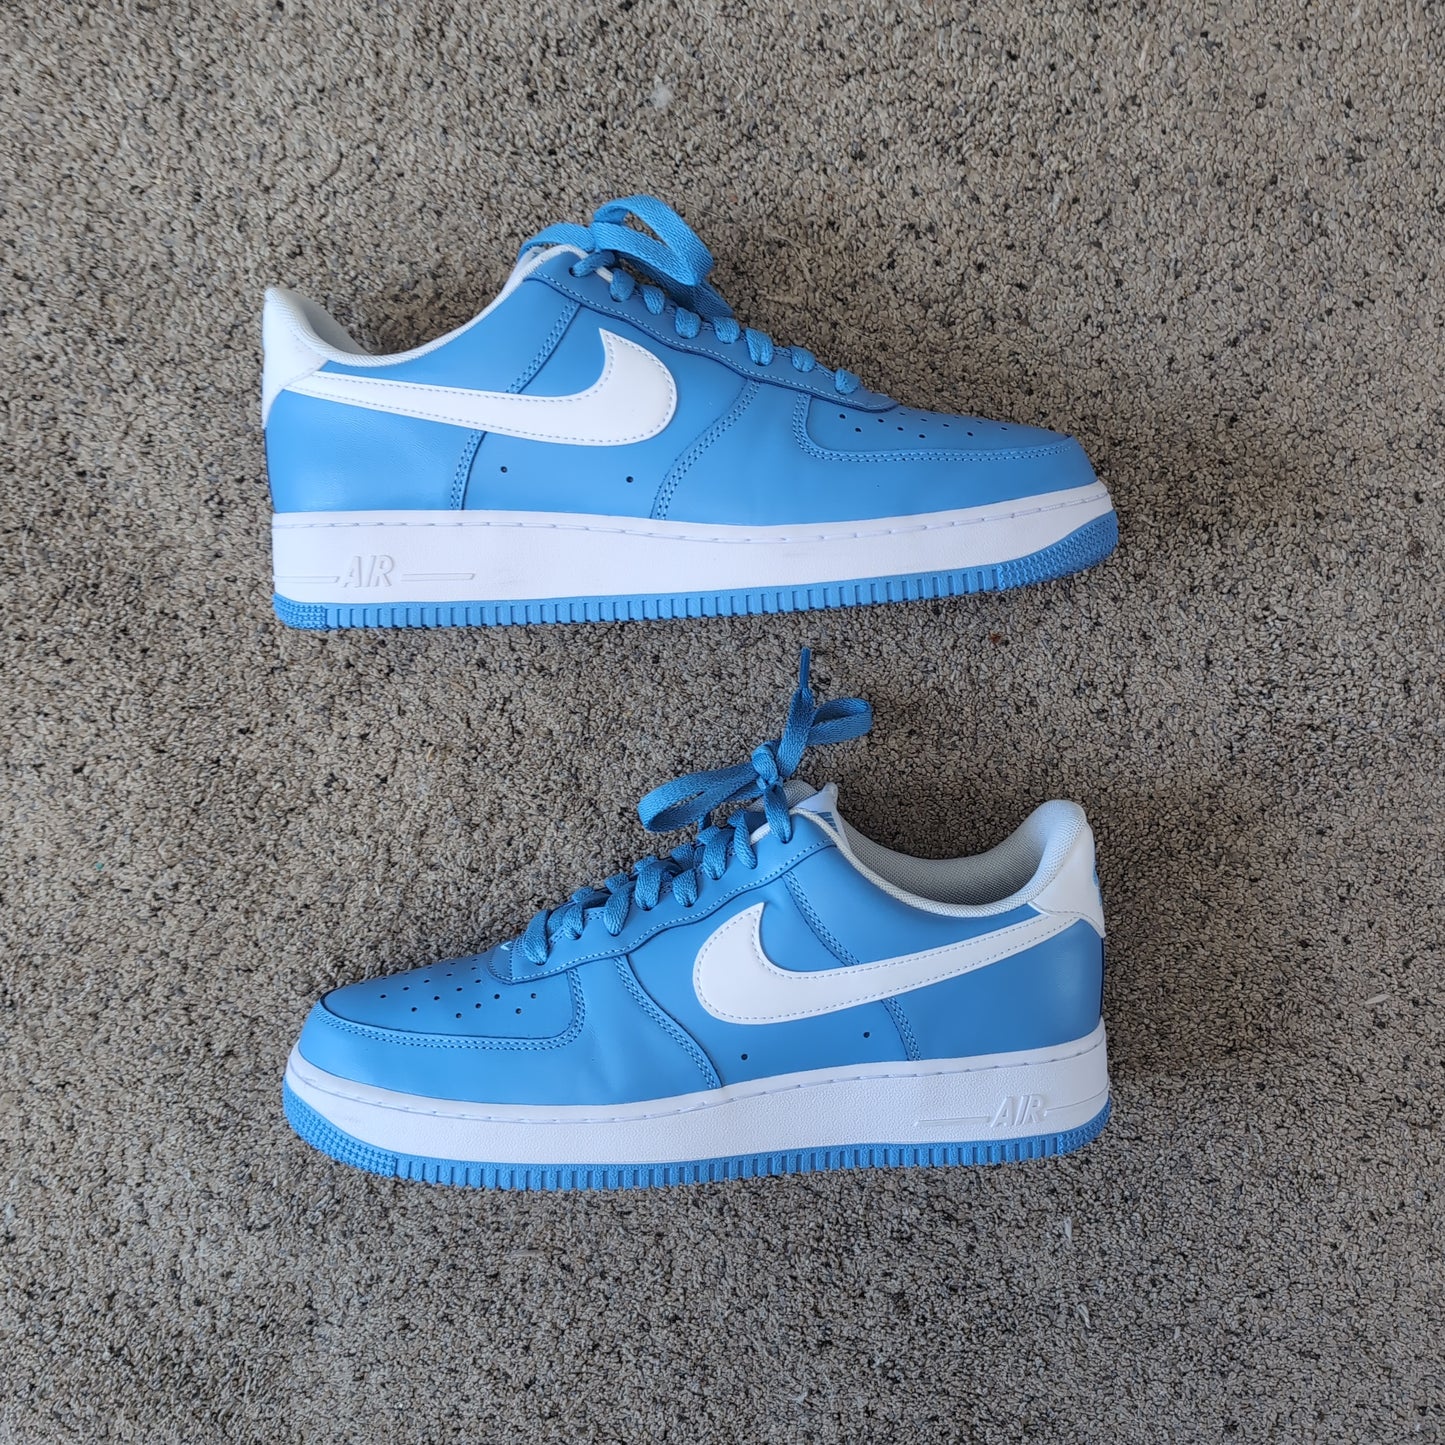 Nike Air Force 1 Low - University Blue - Pre Owned